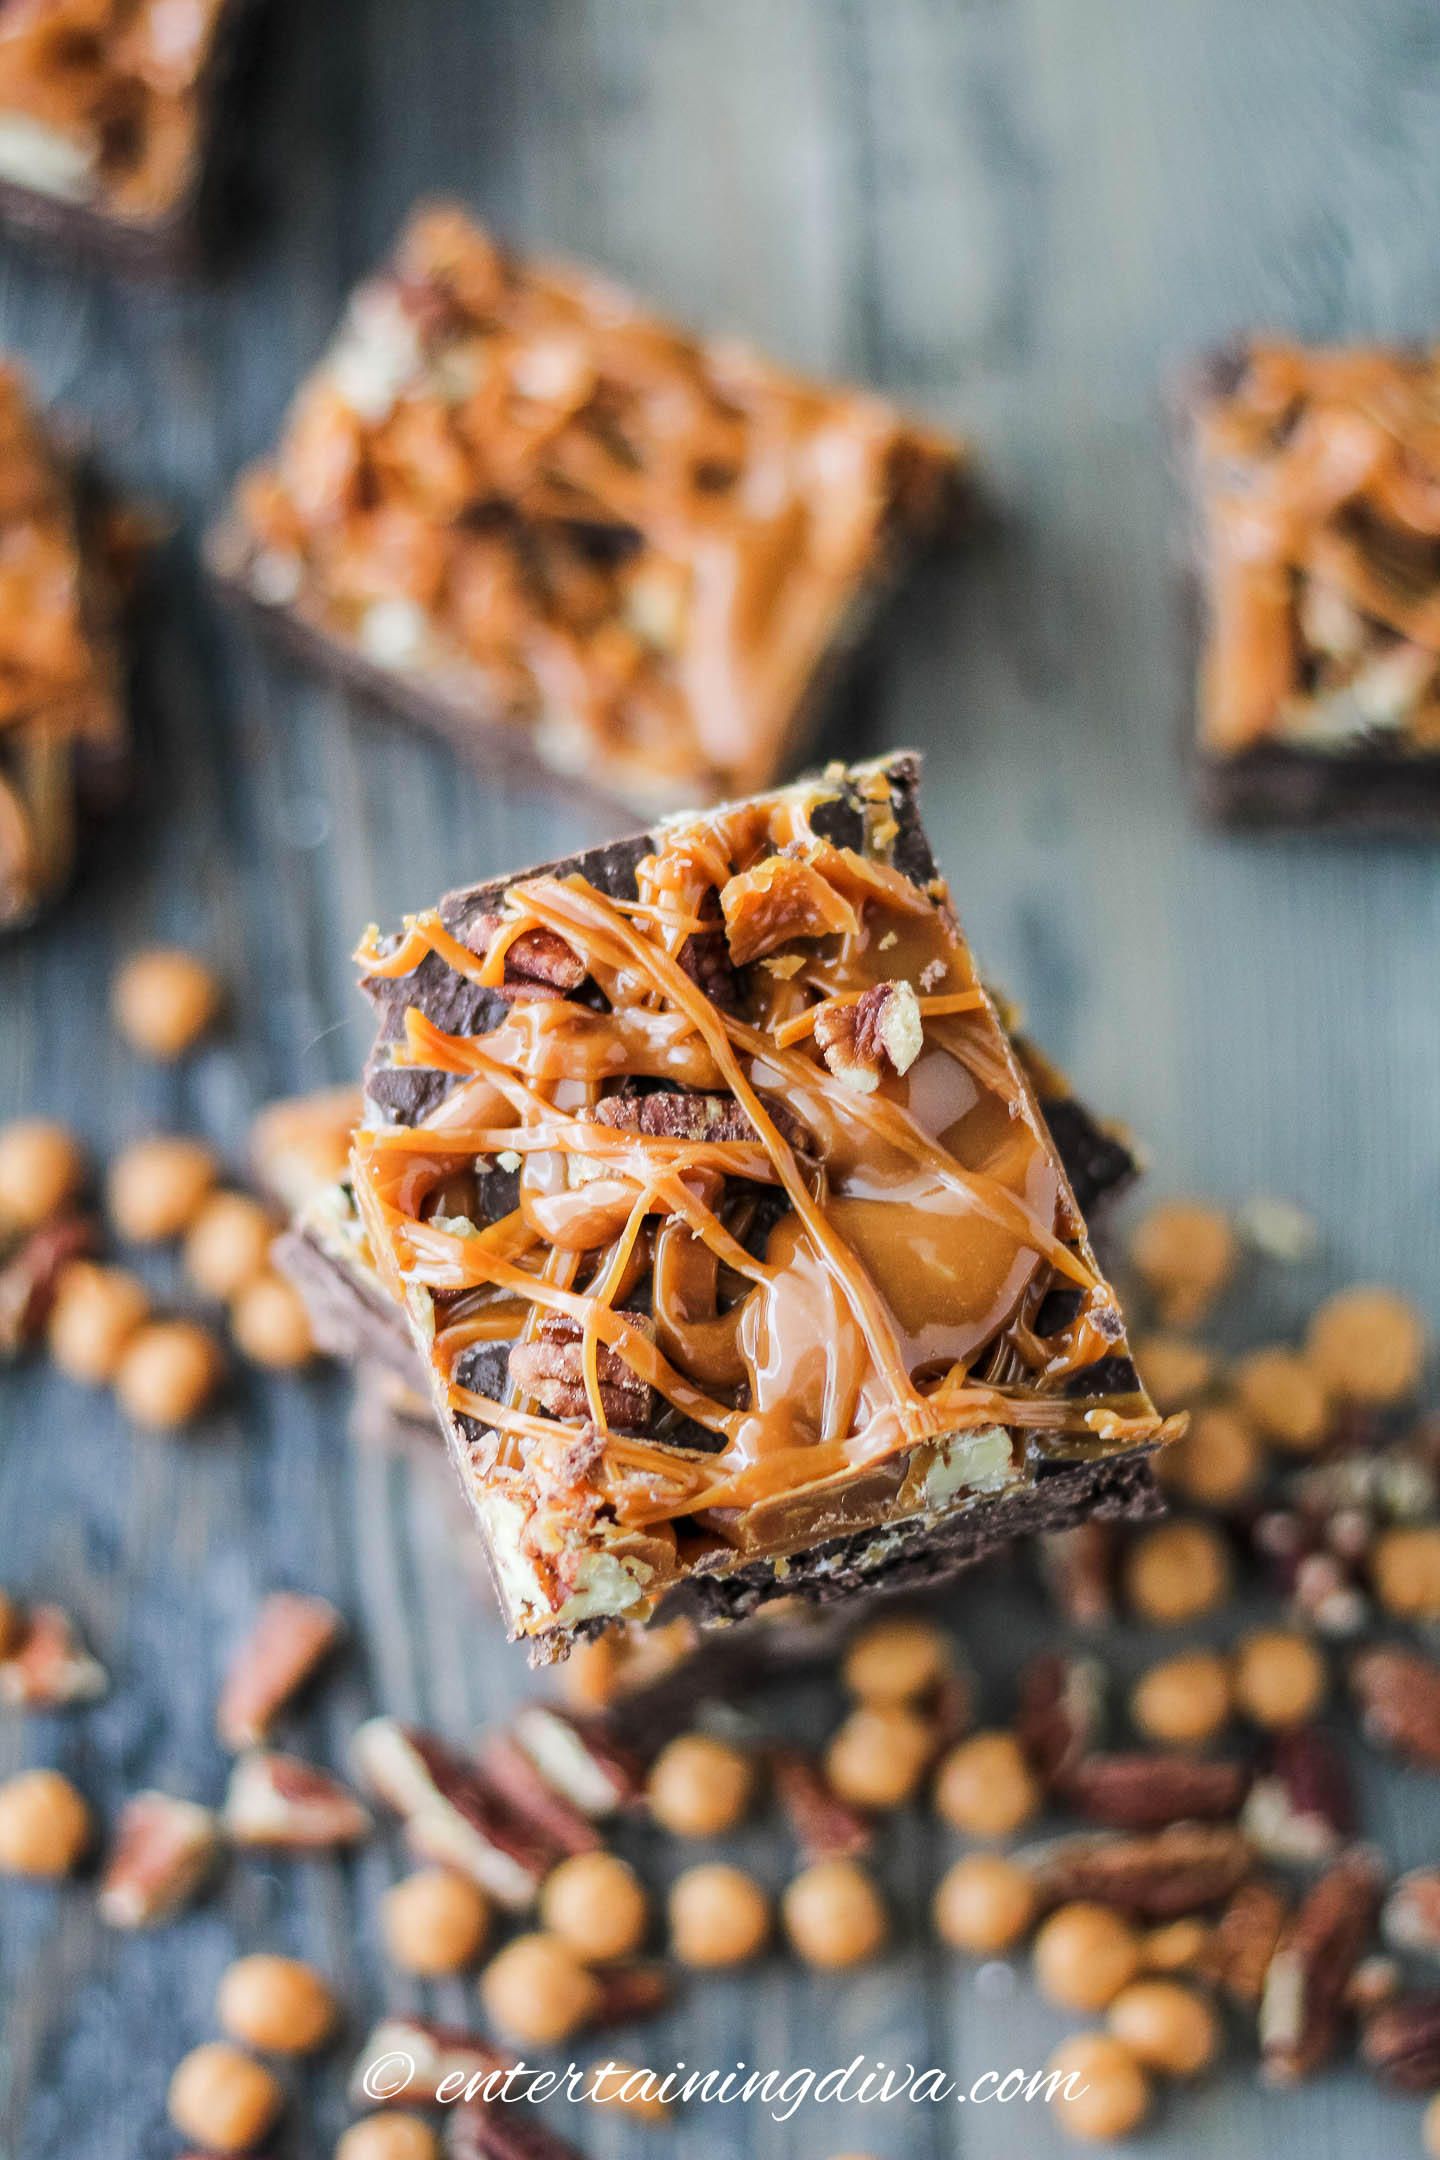 one chocolate cream cheese fudge bar with caramel and pecans